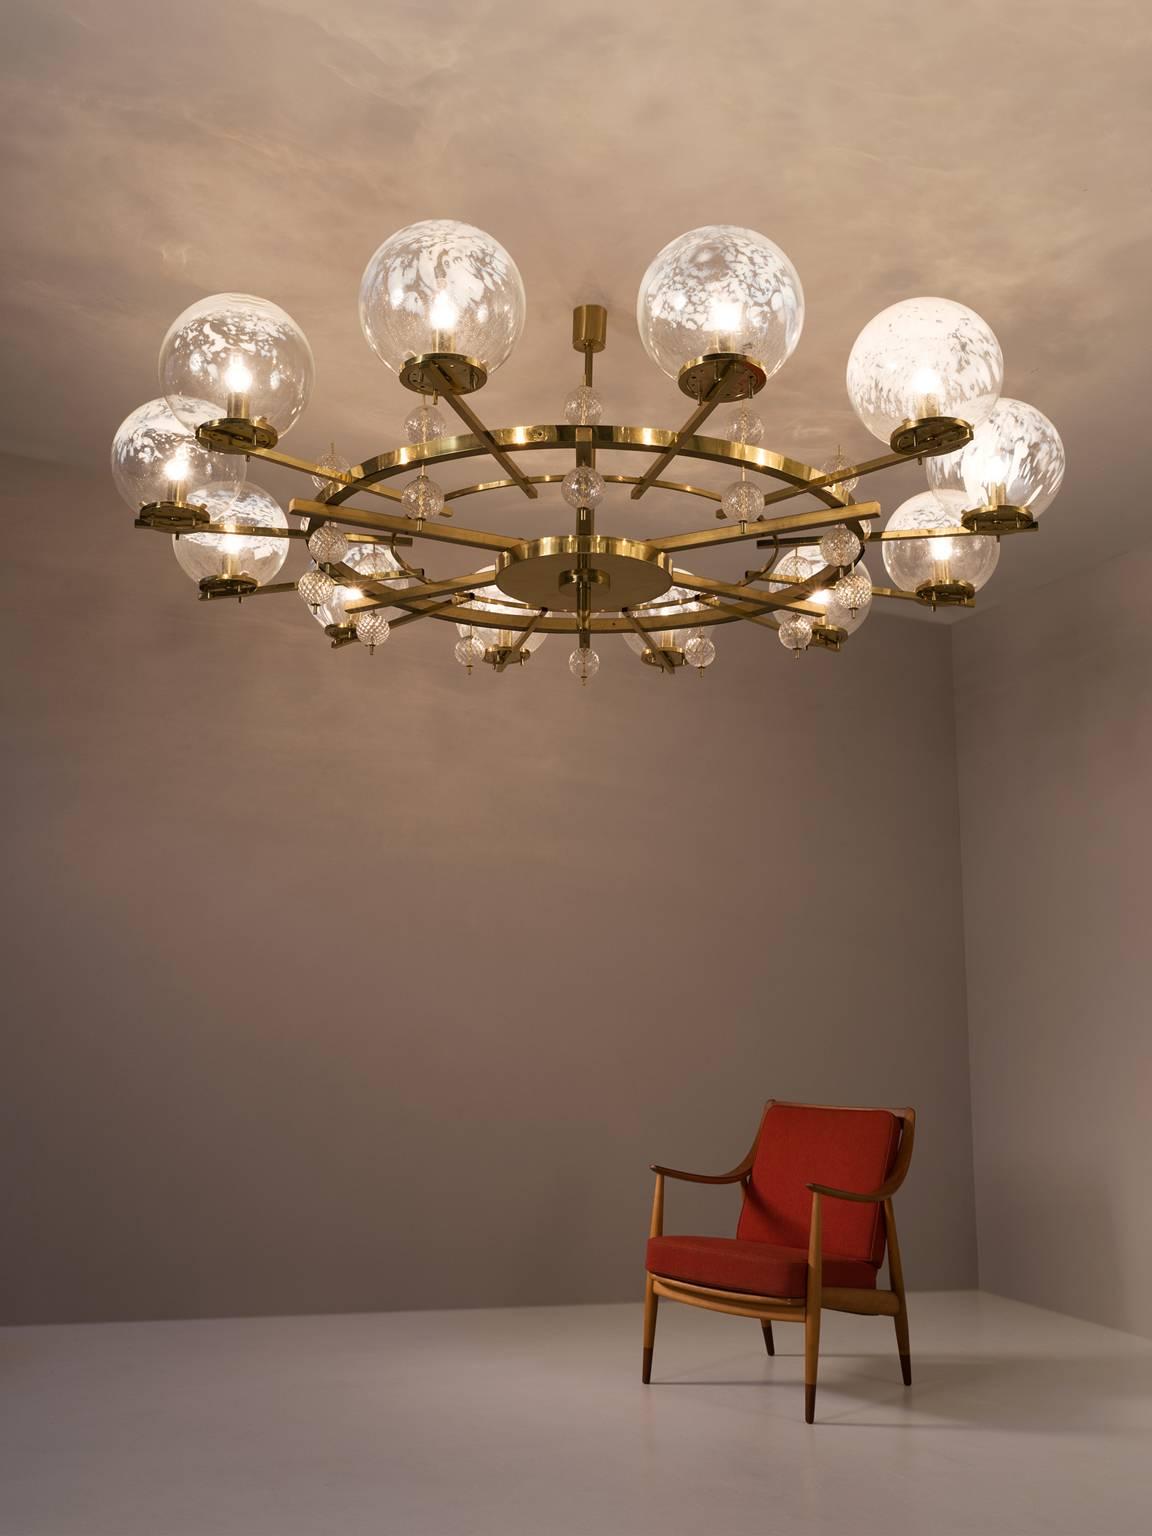 Chandelier, in brass and glass, European, 1970s.

Extreme large chandelier with brass fixture and art-glass. The chandelier with brass frame consist of twelve lights, formed in a circle, with glass shades. The pleasant light it spreads is very